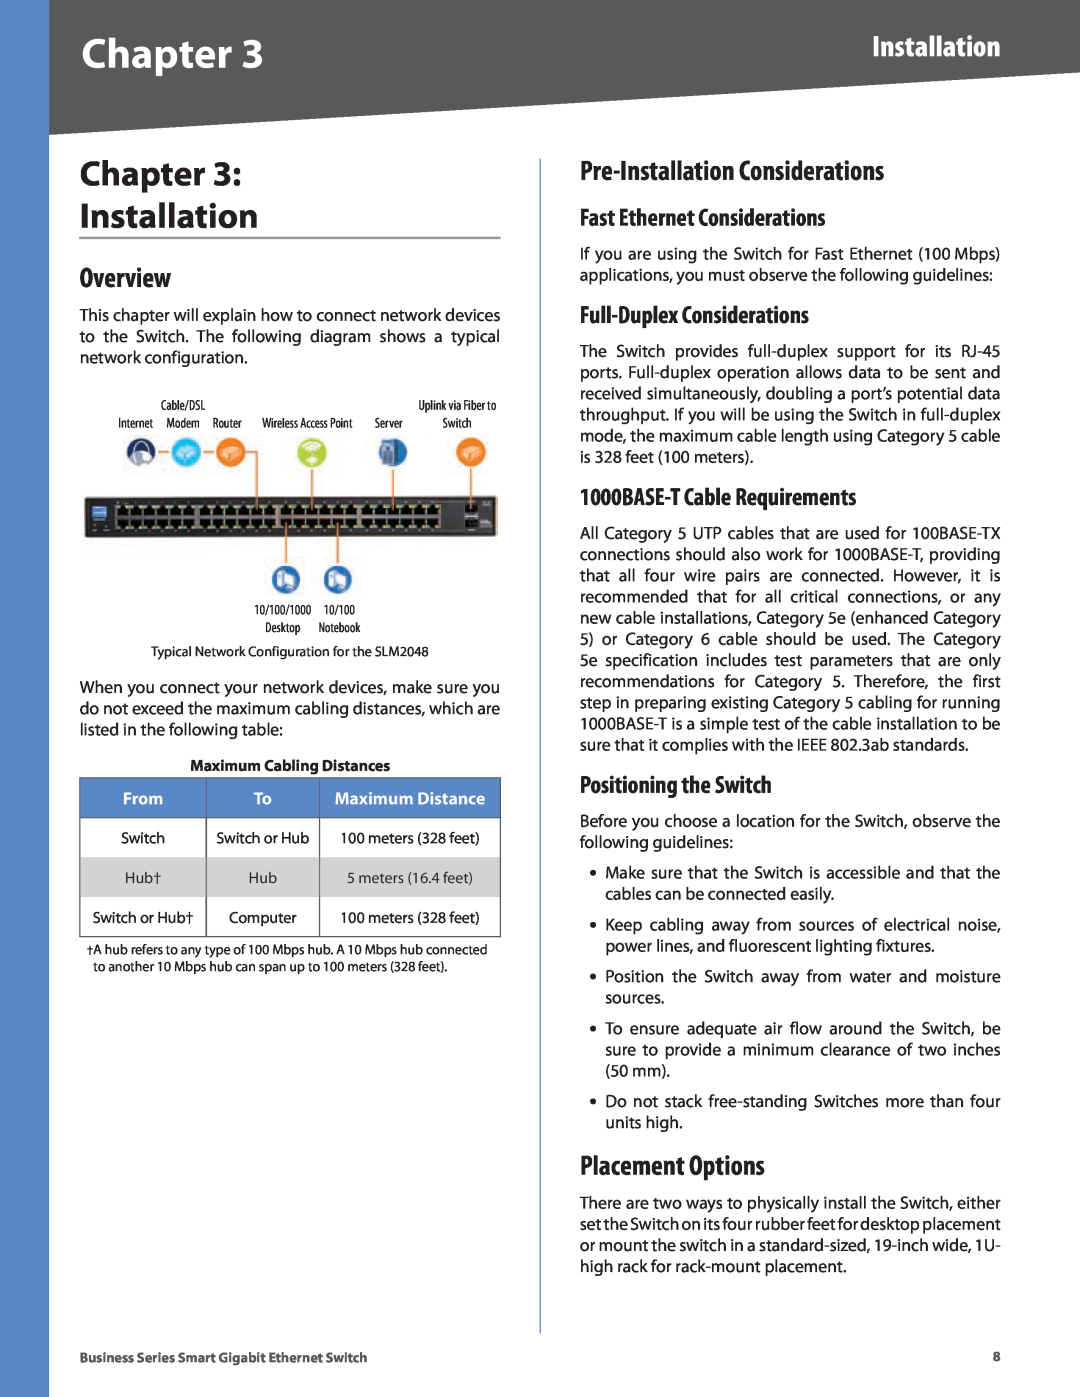 Linksys SLM248G Chapter Installation, Overview, Pre-Installation Considerations, Placement Options, Positioning the Switch 